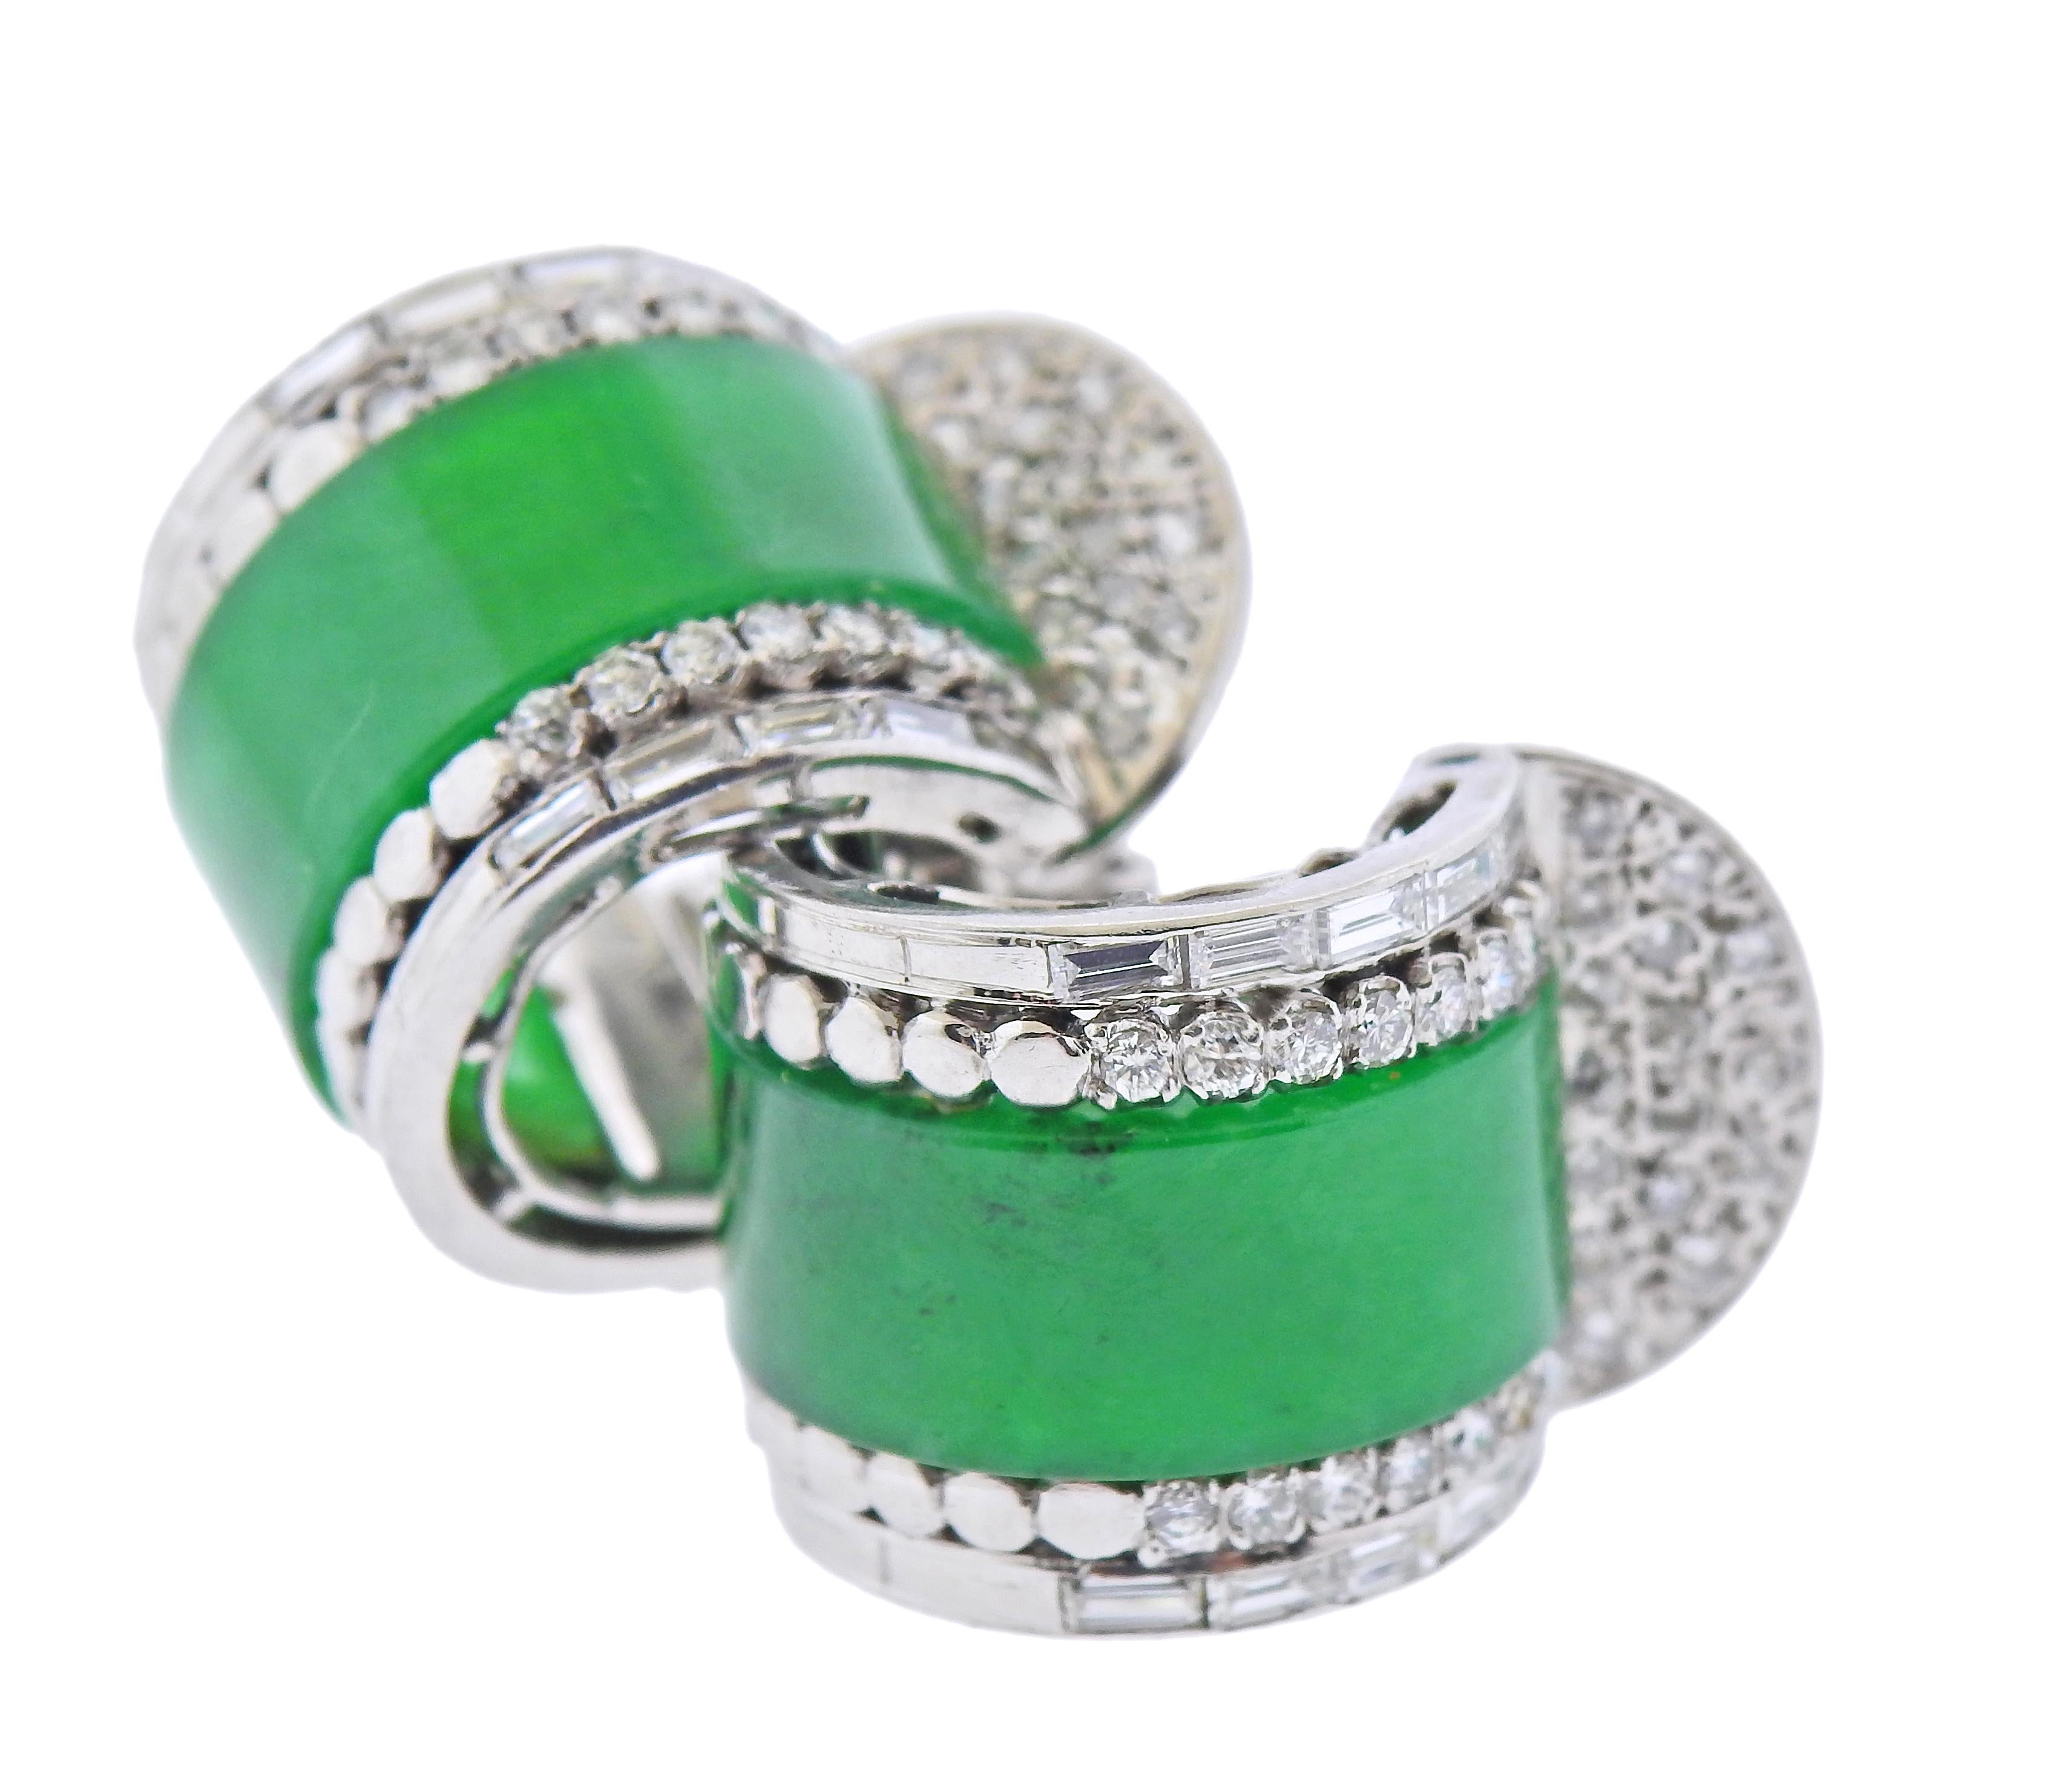 Pair of 14k white gold hoop earrings with GIA natural jadeite jades. Earrings are 18mm in diameter x 15mm wide. Diamonds approx. 1.10ctw in diamonds. Marked 14k. Weight - 21.5 grams.